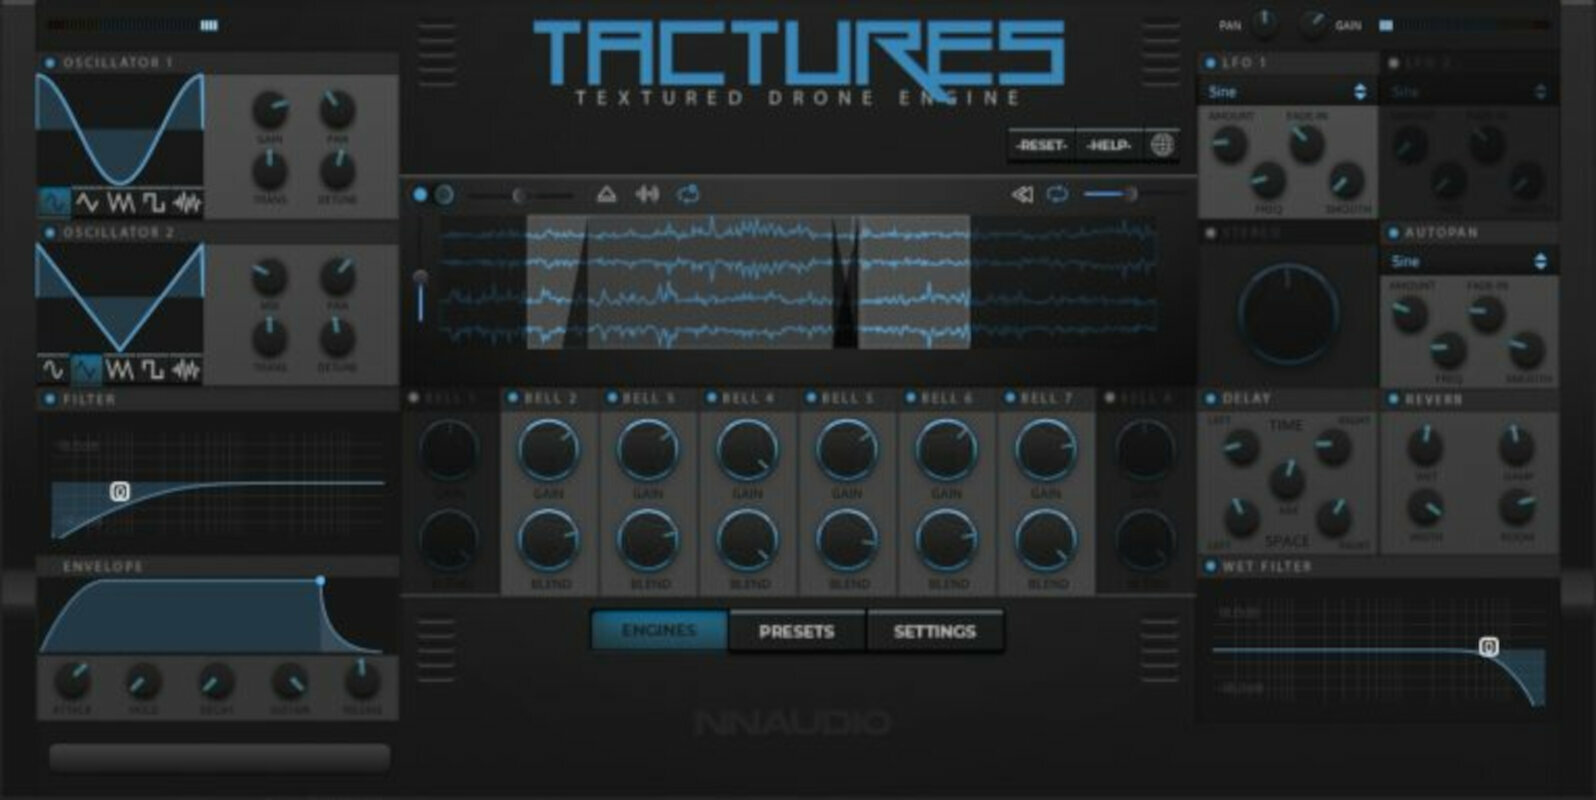 Wtyczka FX New Nation Tactures - Textured Drone Engine (Produkt cyfrowy)